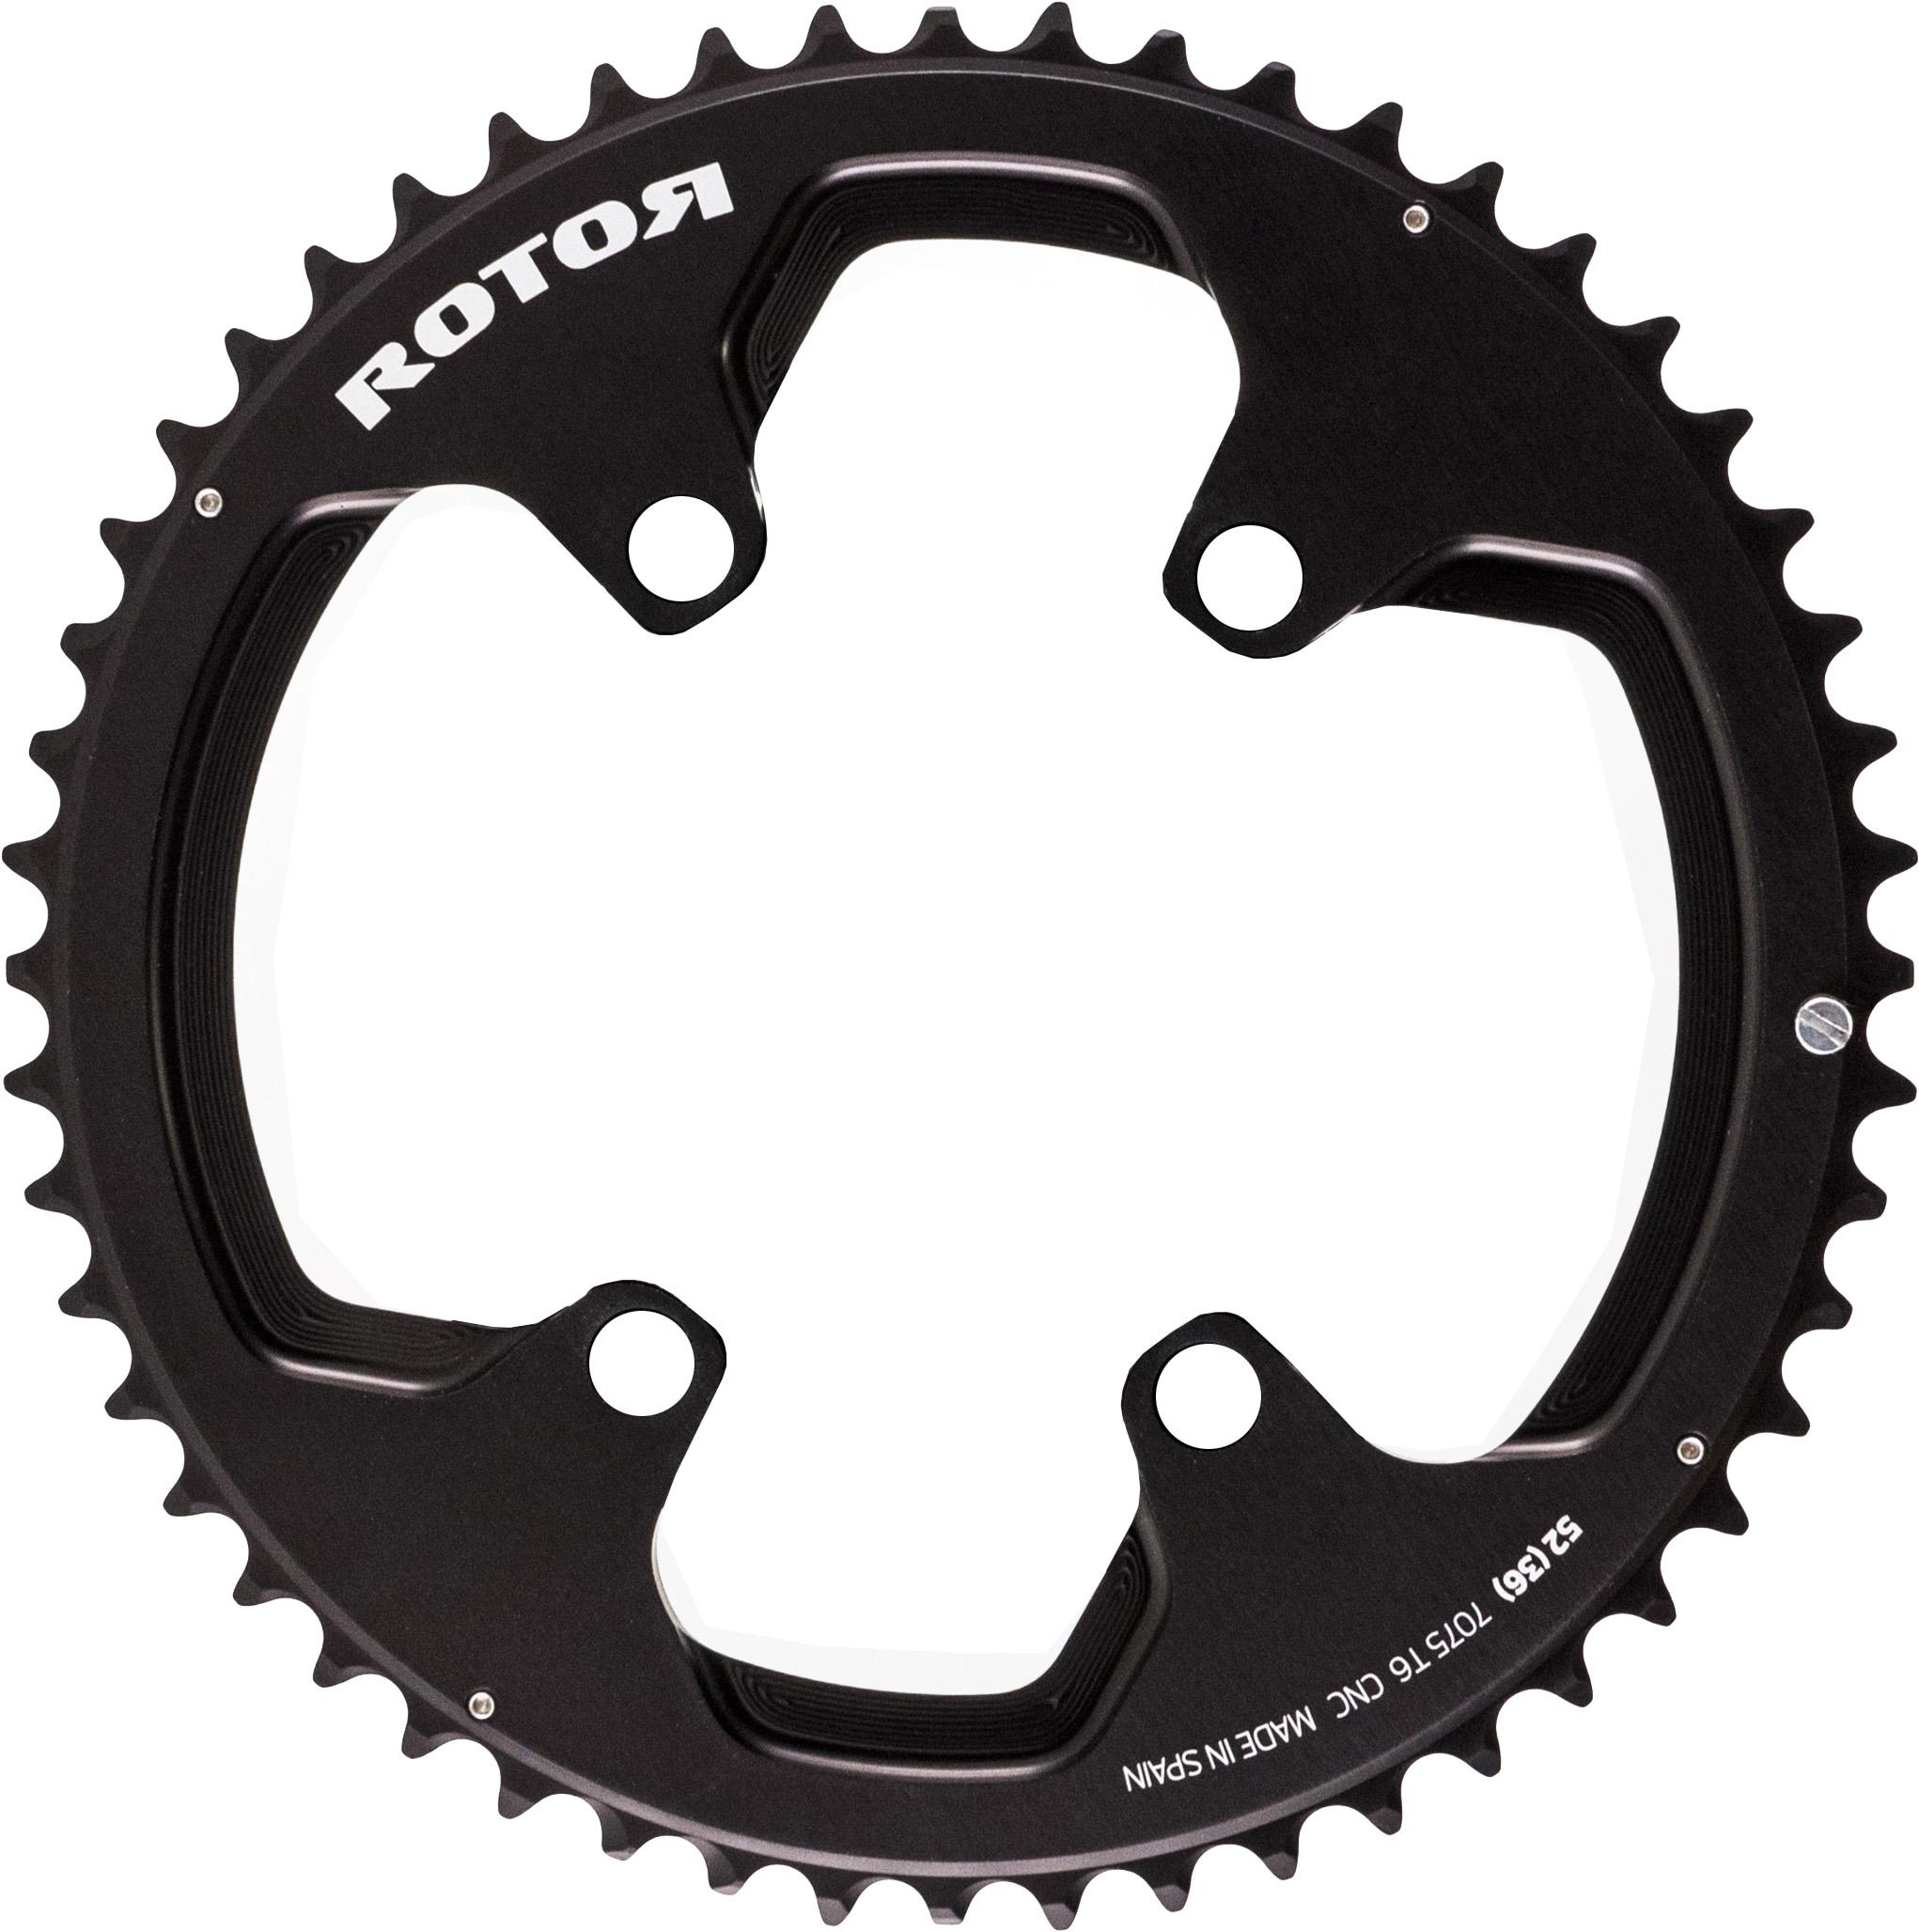 Rotor Noq Round 4-bolt Outer Chainring - Black